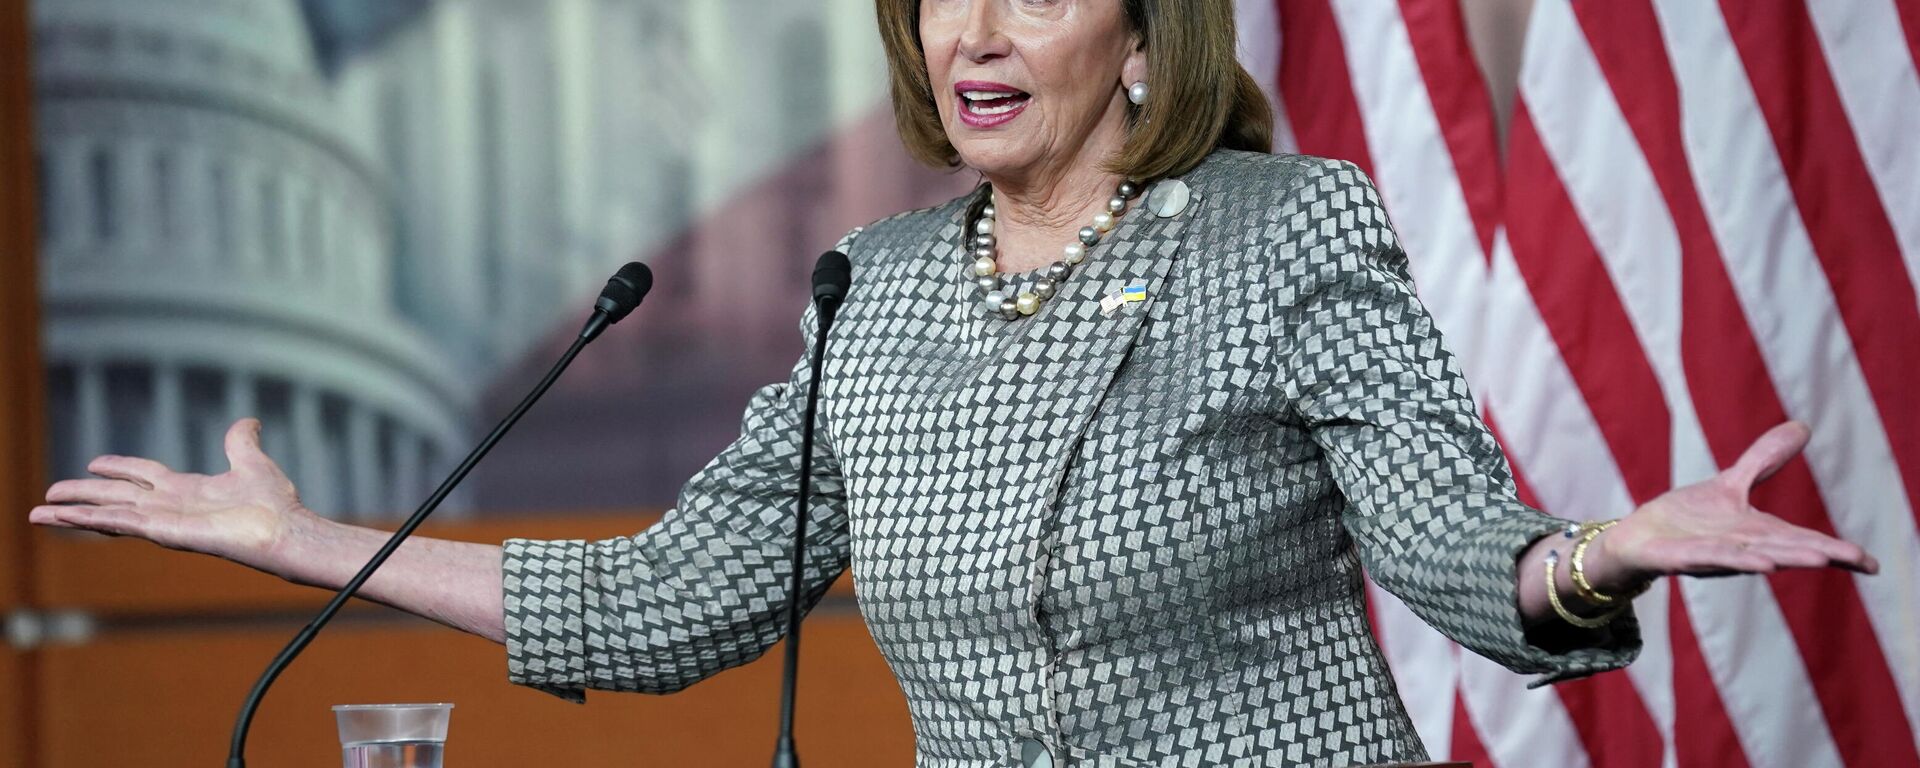 Speaker of the House Nancy Pelosi gestures as she speaks during a news conference at the U.S. Capitol in Washington March 3, 2022 - Sputnik International, 1920, 07.03.2022